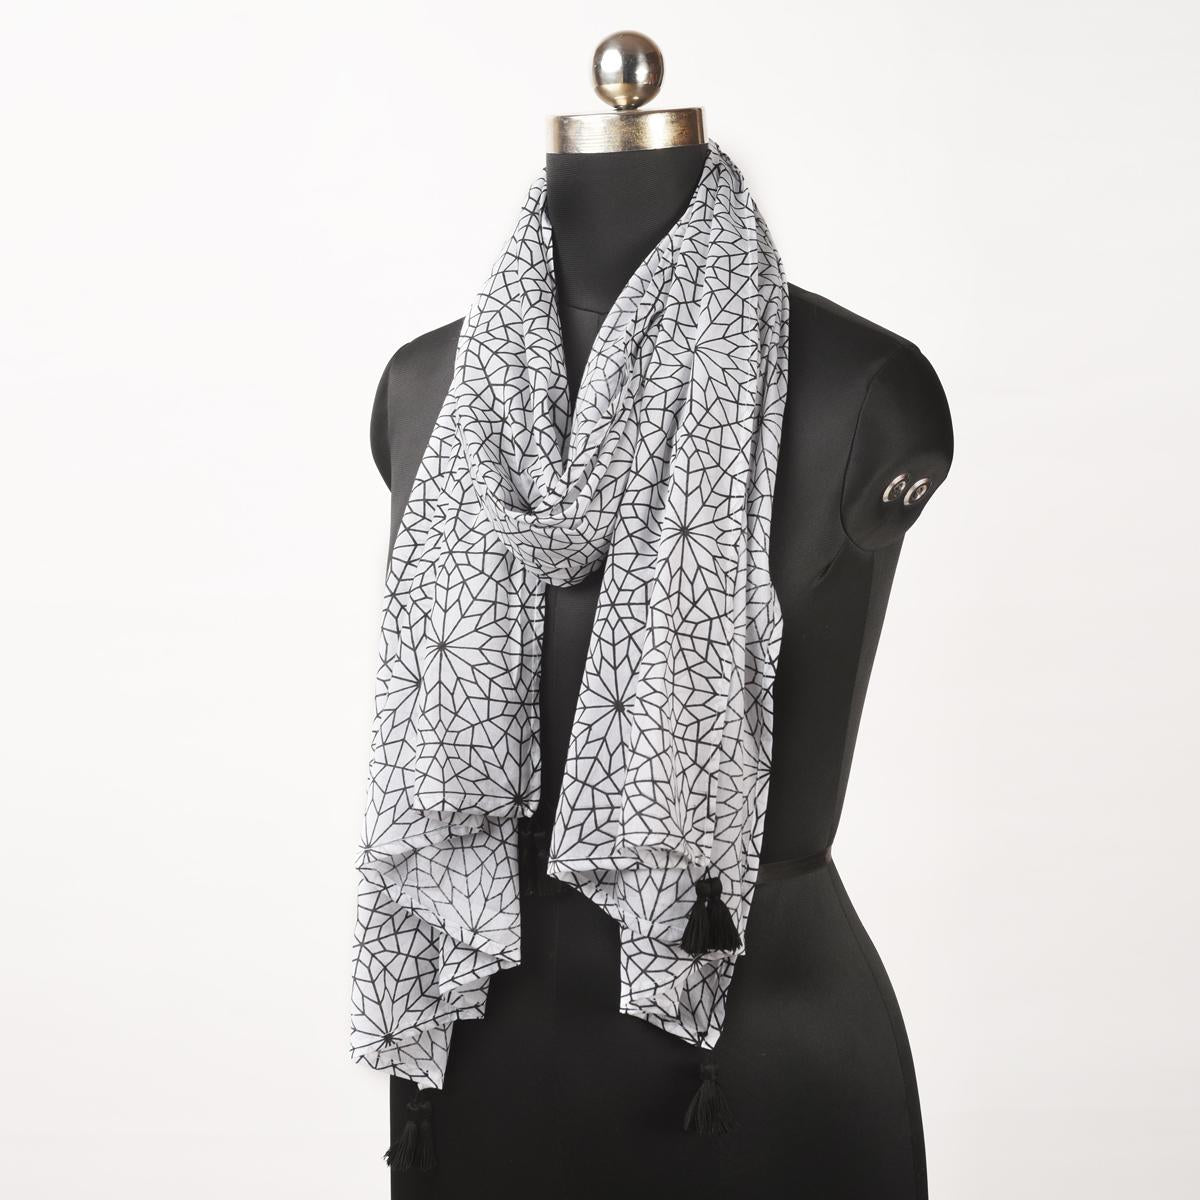 Black and white moroccan print Spring Summer Scarf, Gifts For Her, boho scarf